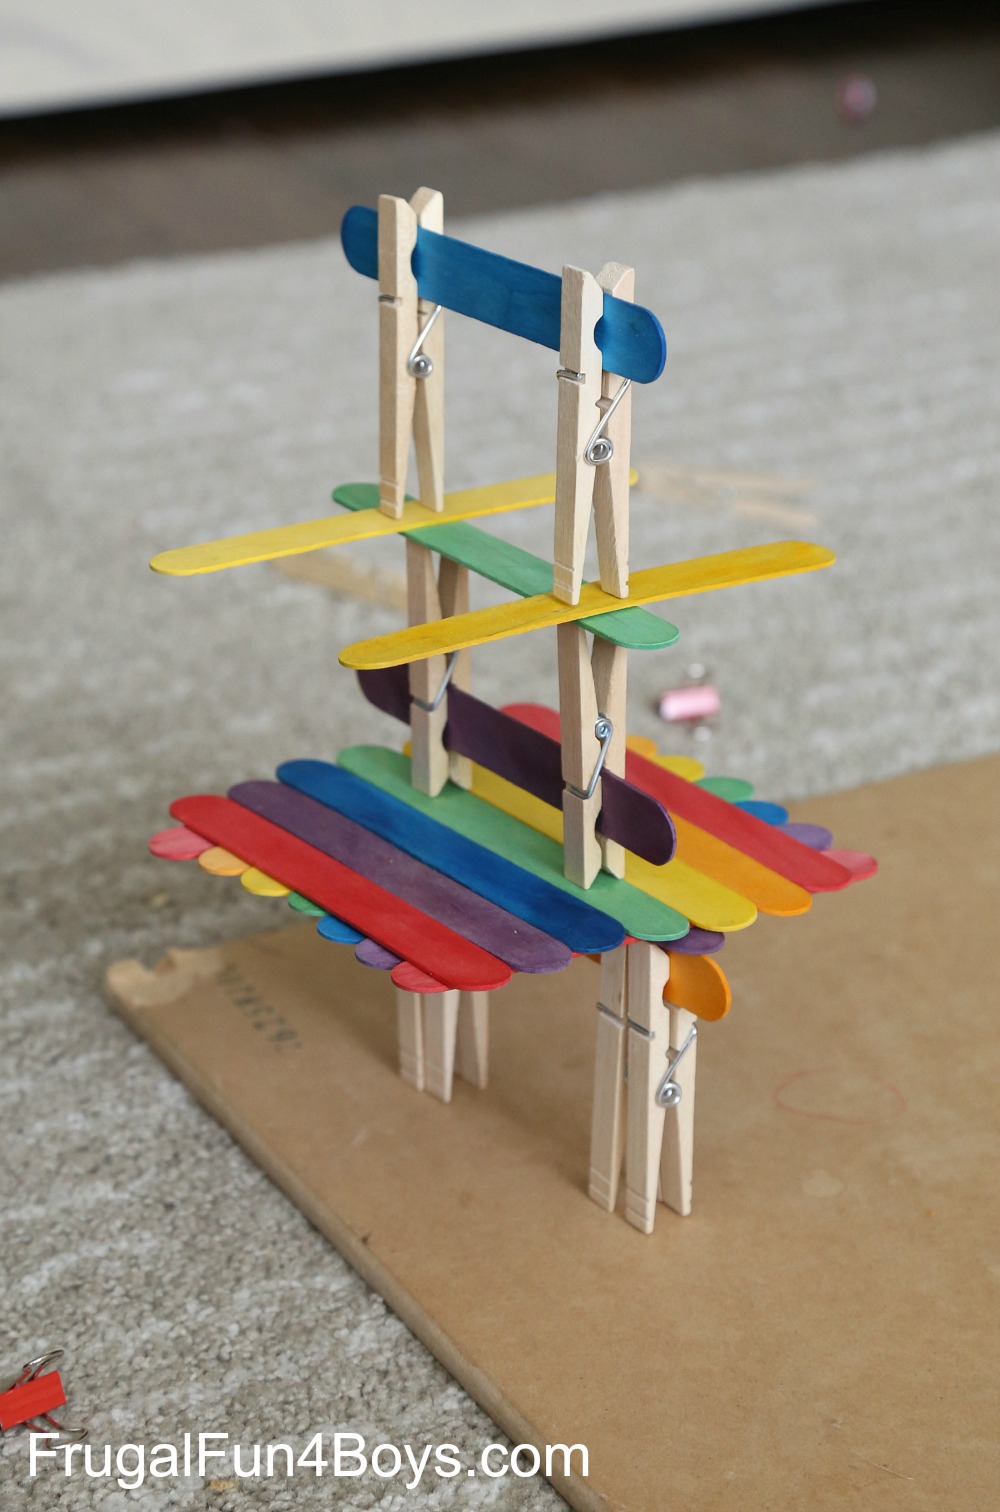 Five Engineering Challenges with Clothespins, Binder Clips, and Craft Sticks